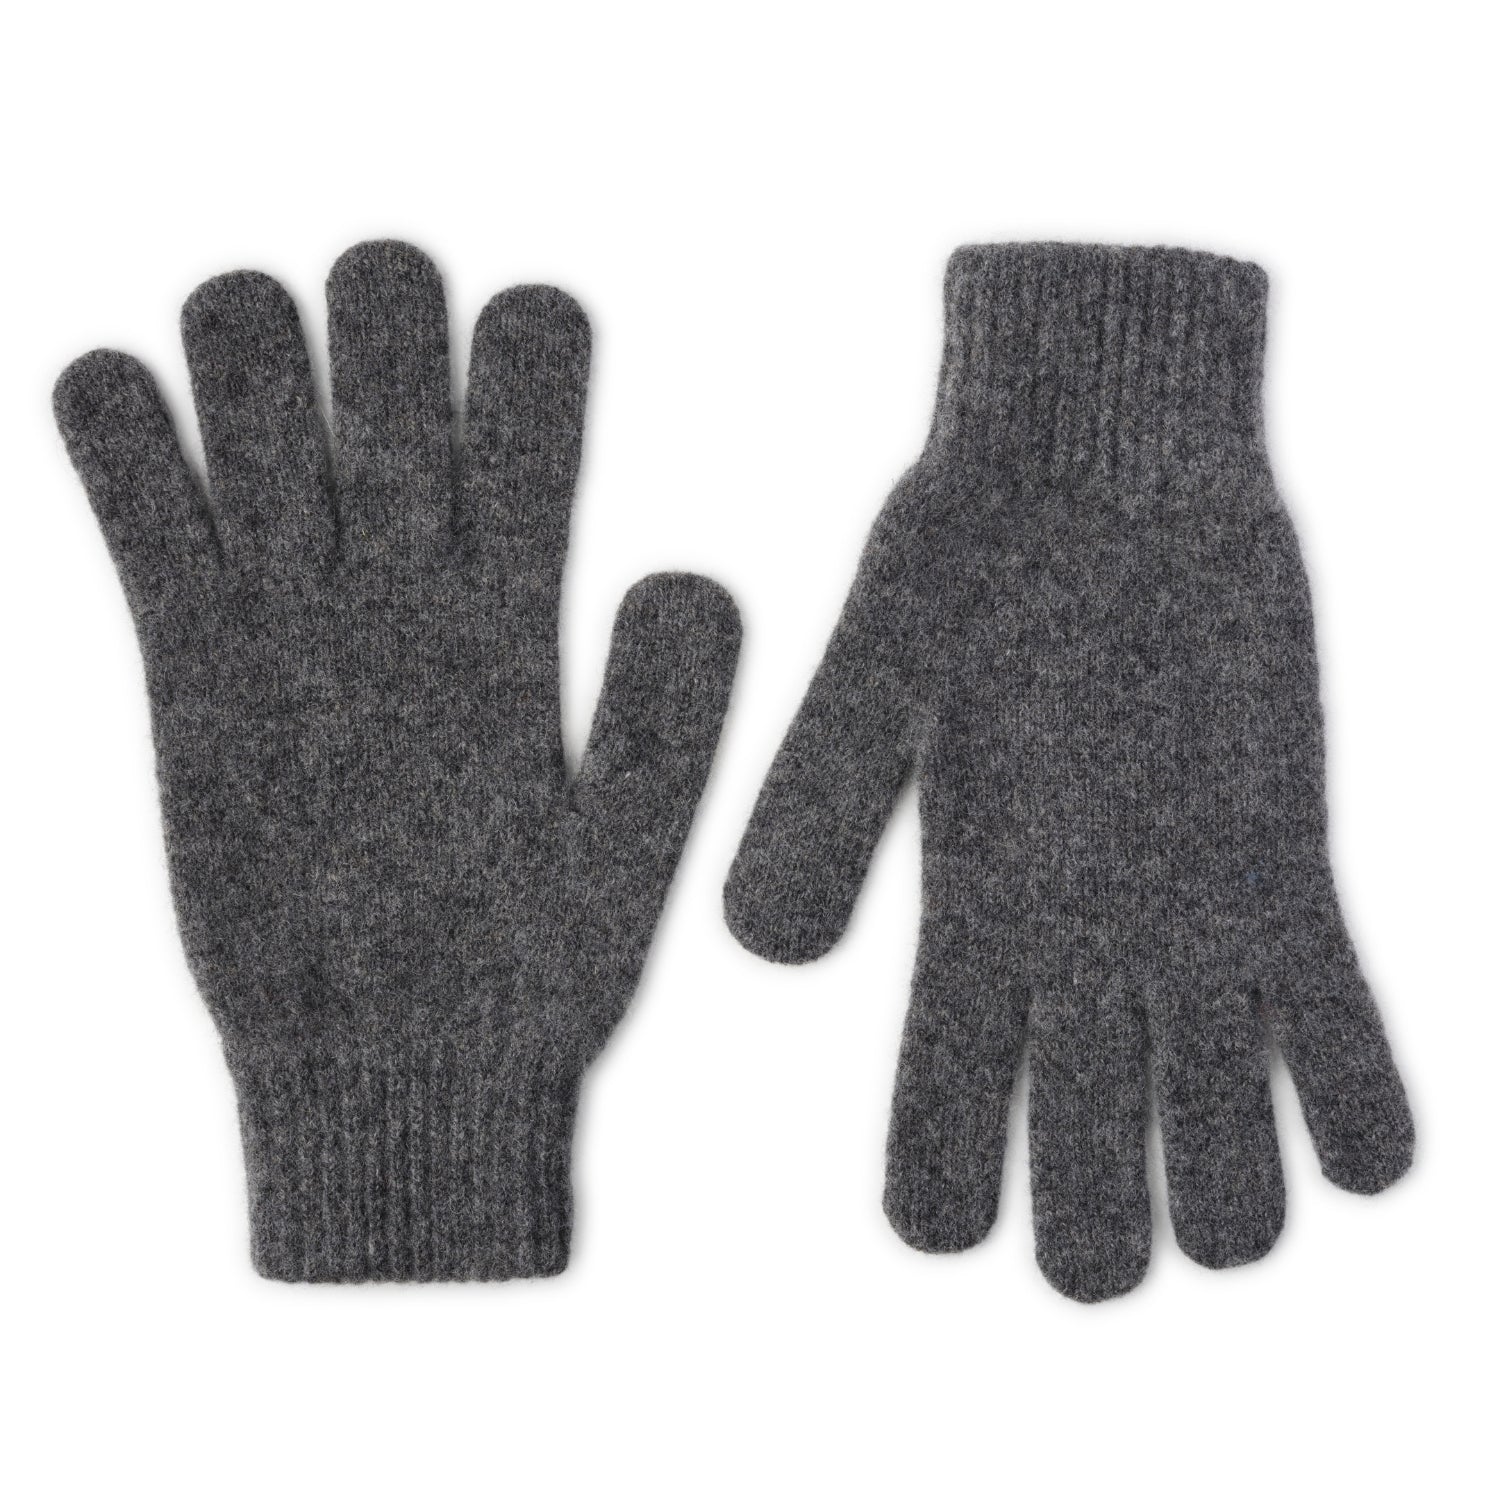 Lambswool Gloves - Mens Wool Gloves UK - Charcoal Grey